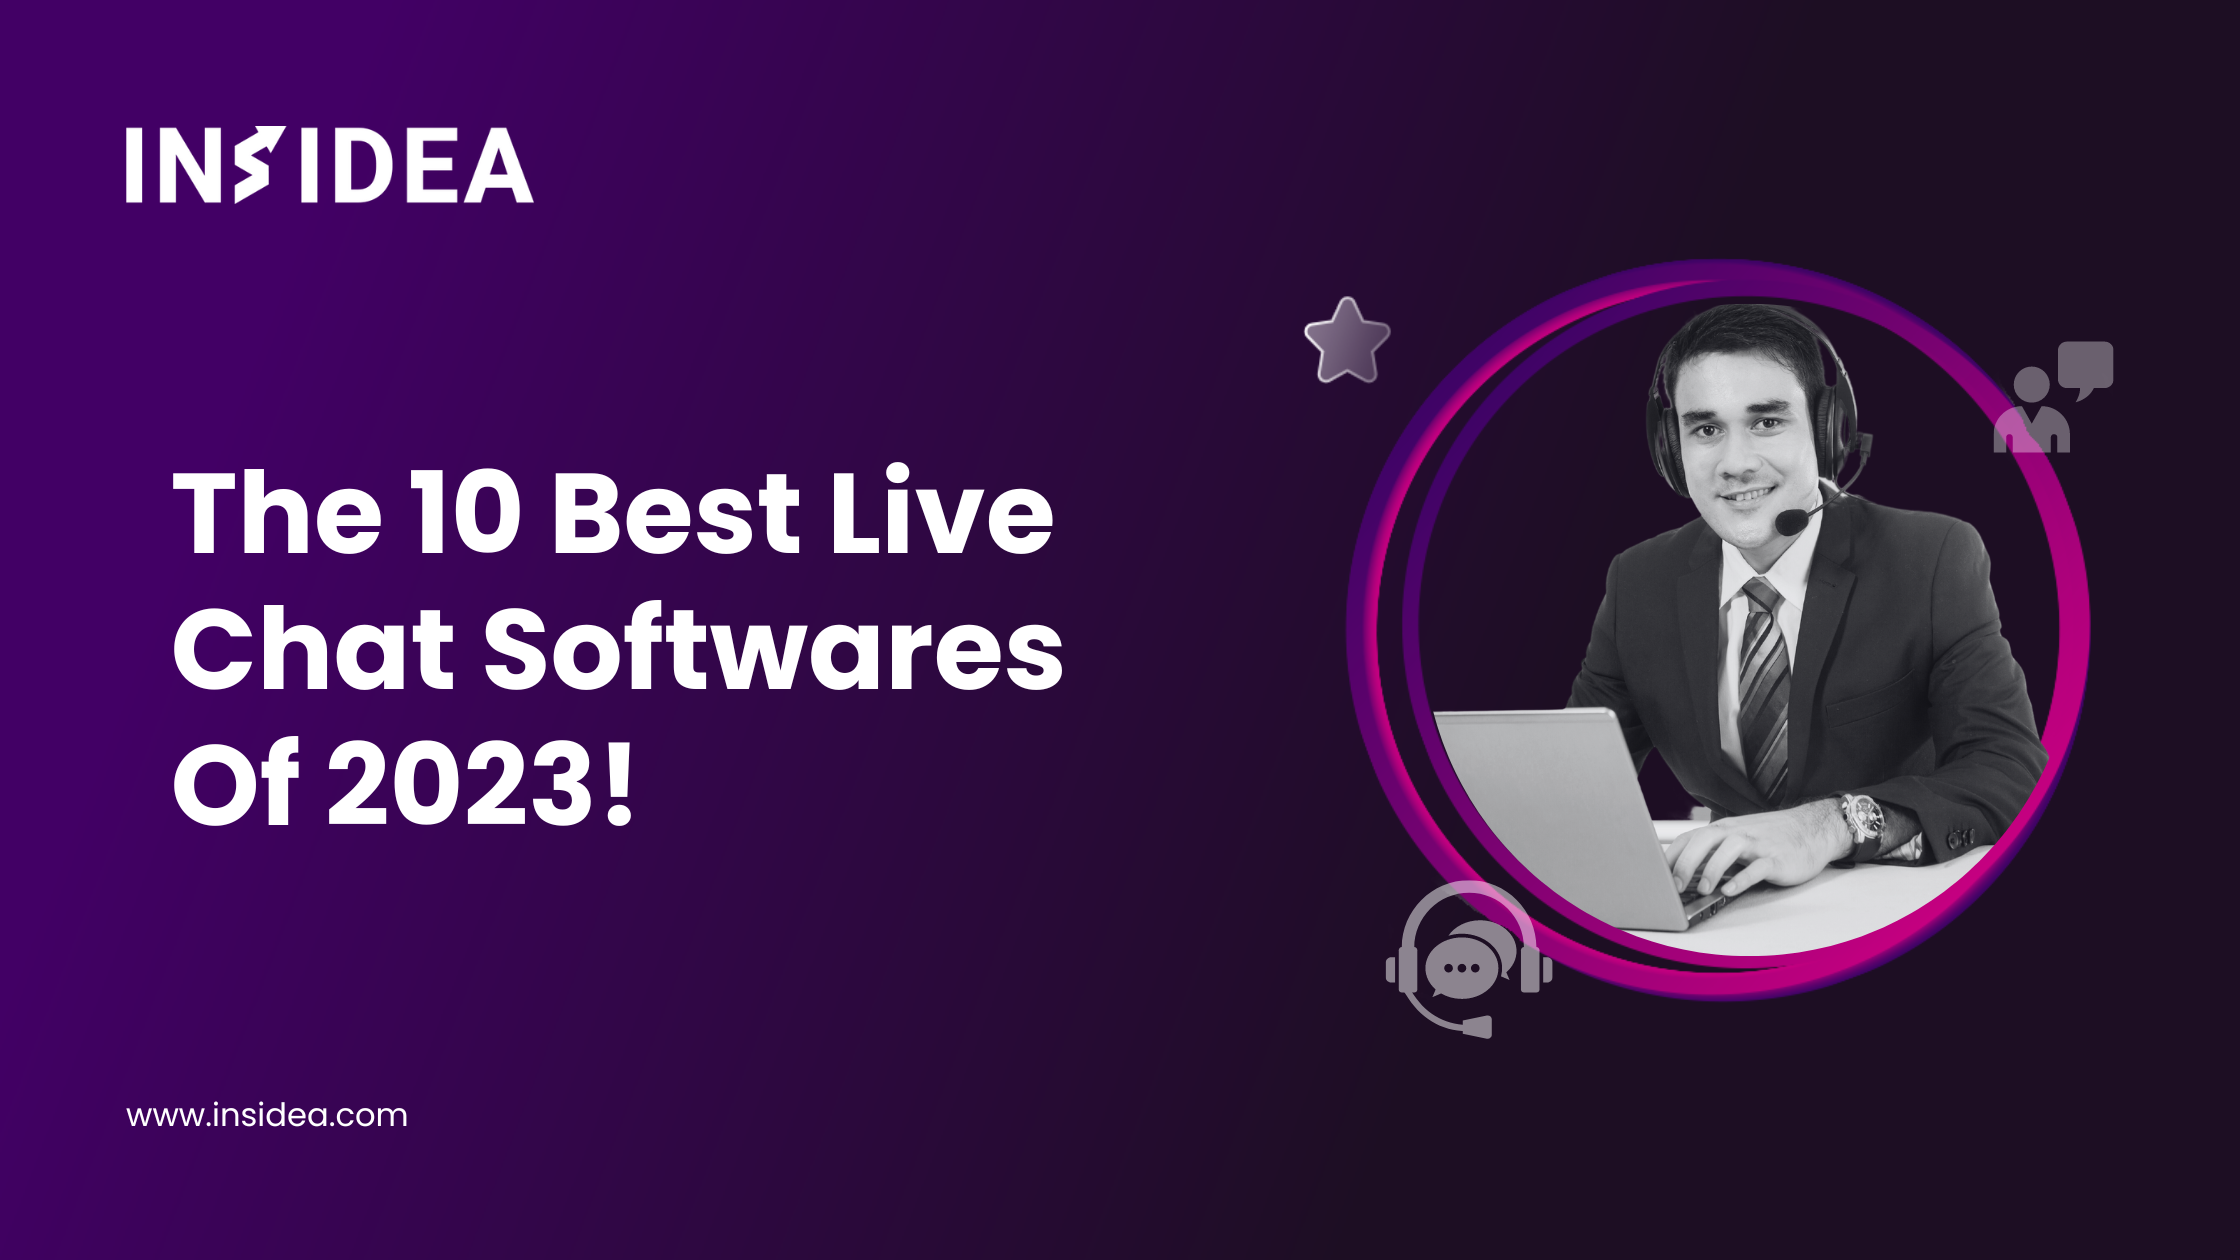 The 10 Best Live Chat Softwares Of 2023!